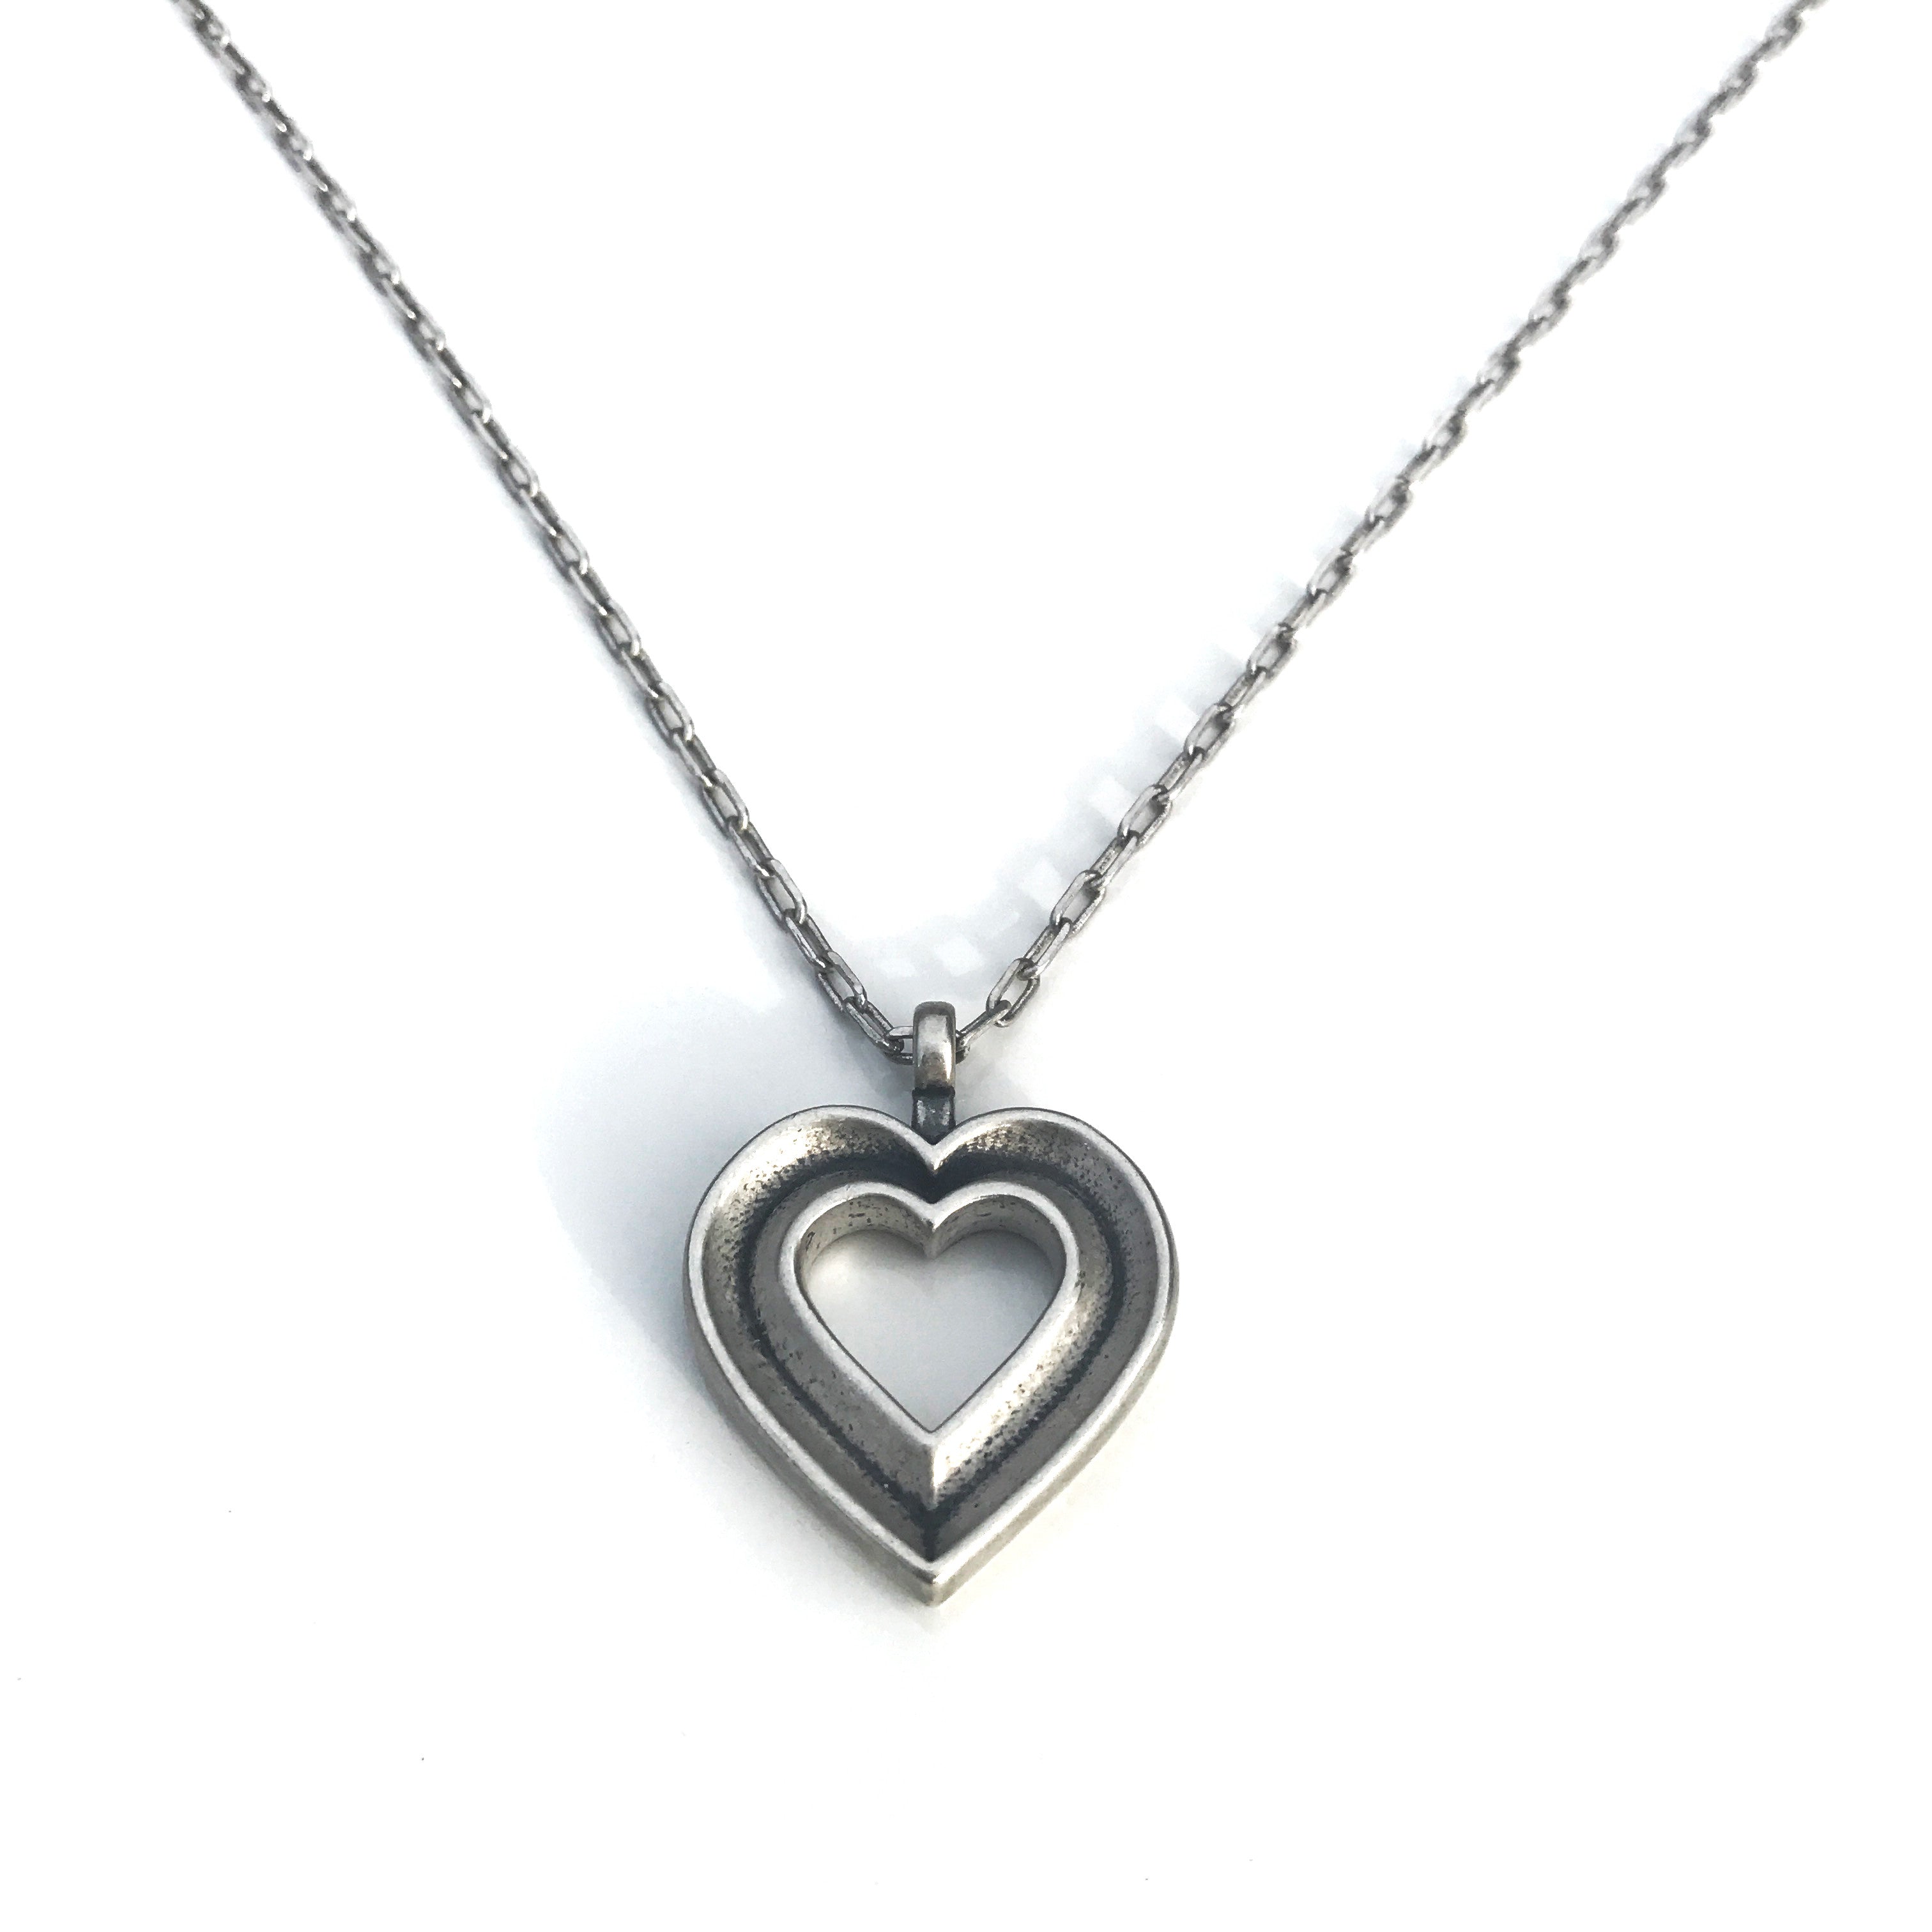 LOVE Heartbeat Necklace - Sterling Silver